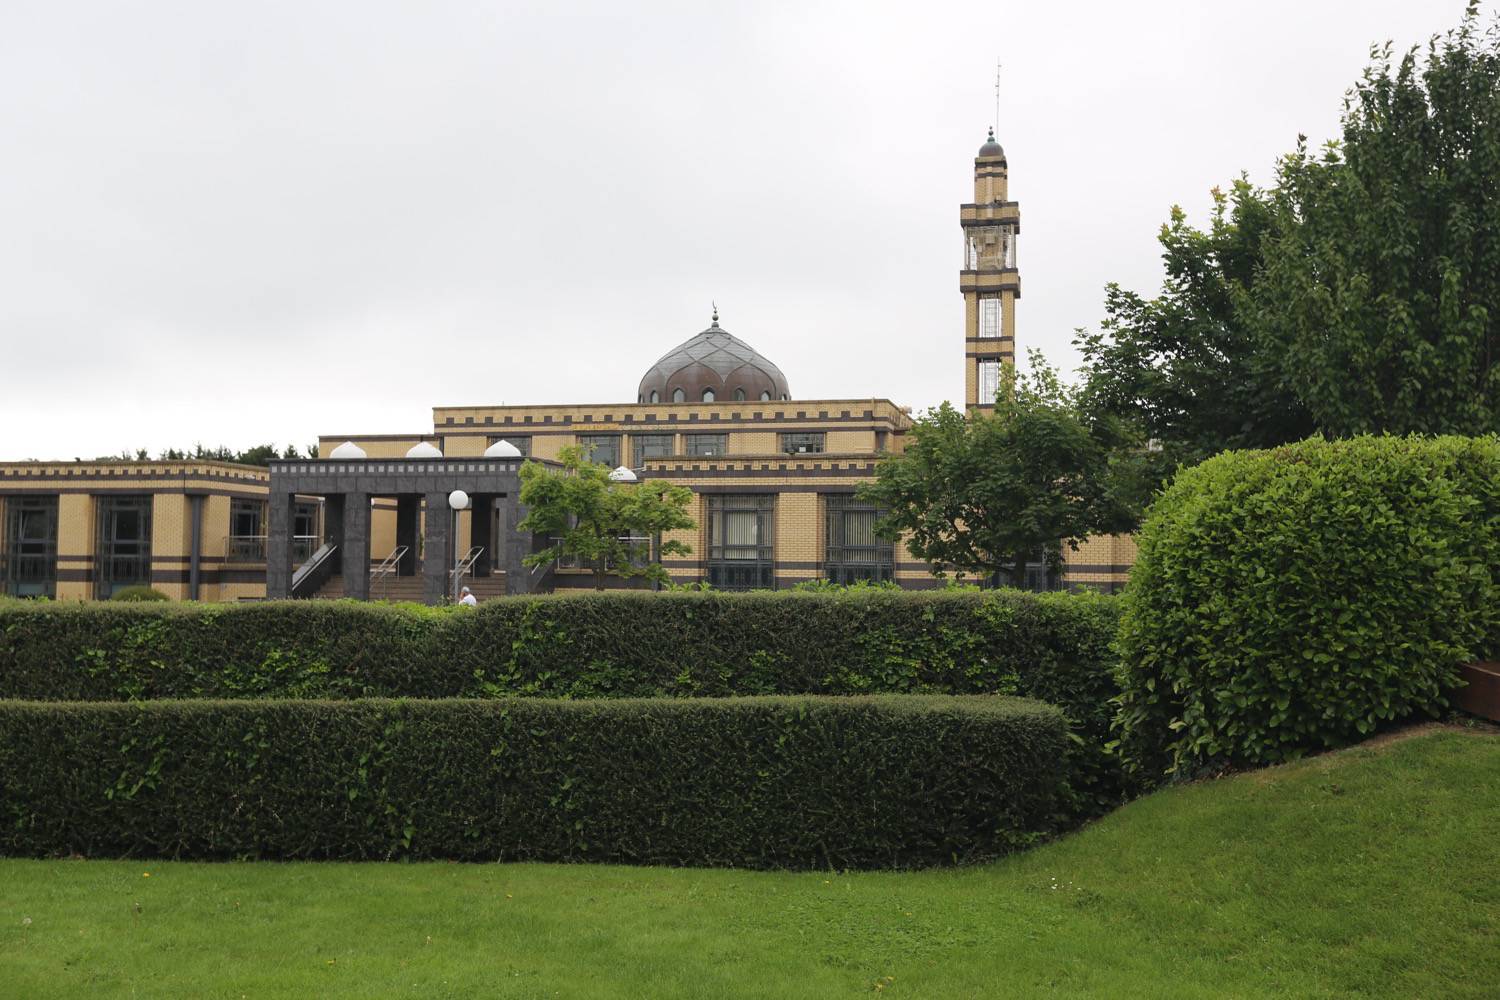 View of the mosque from the entry drive